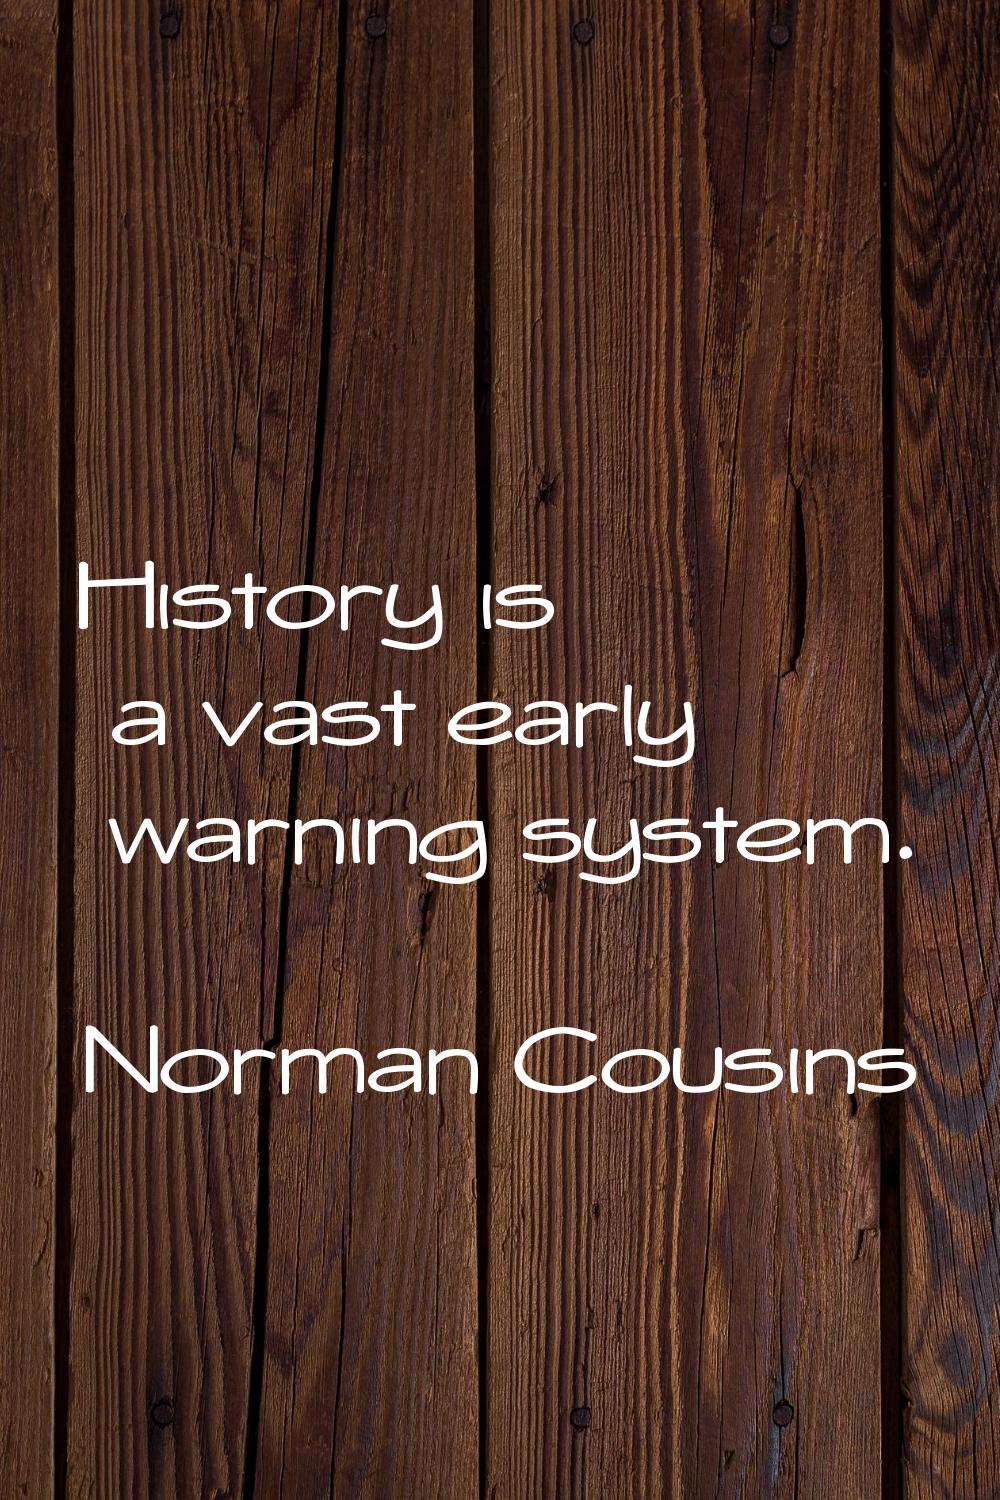 History is a vast early warning system.